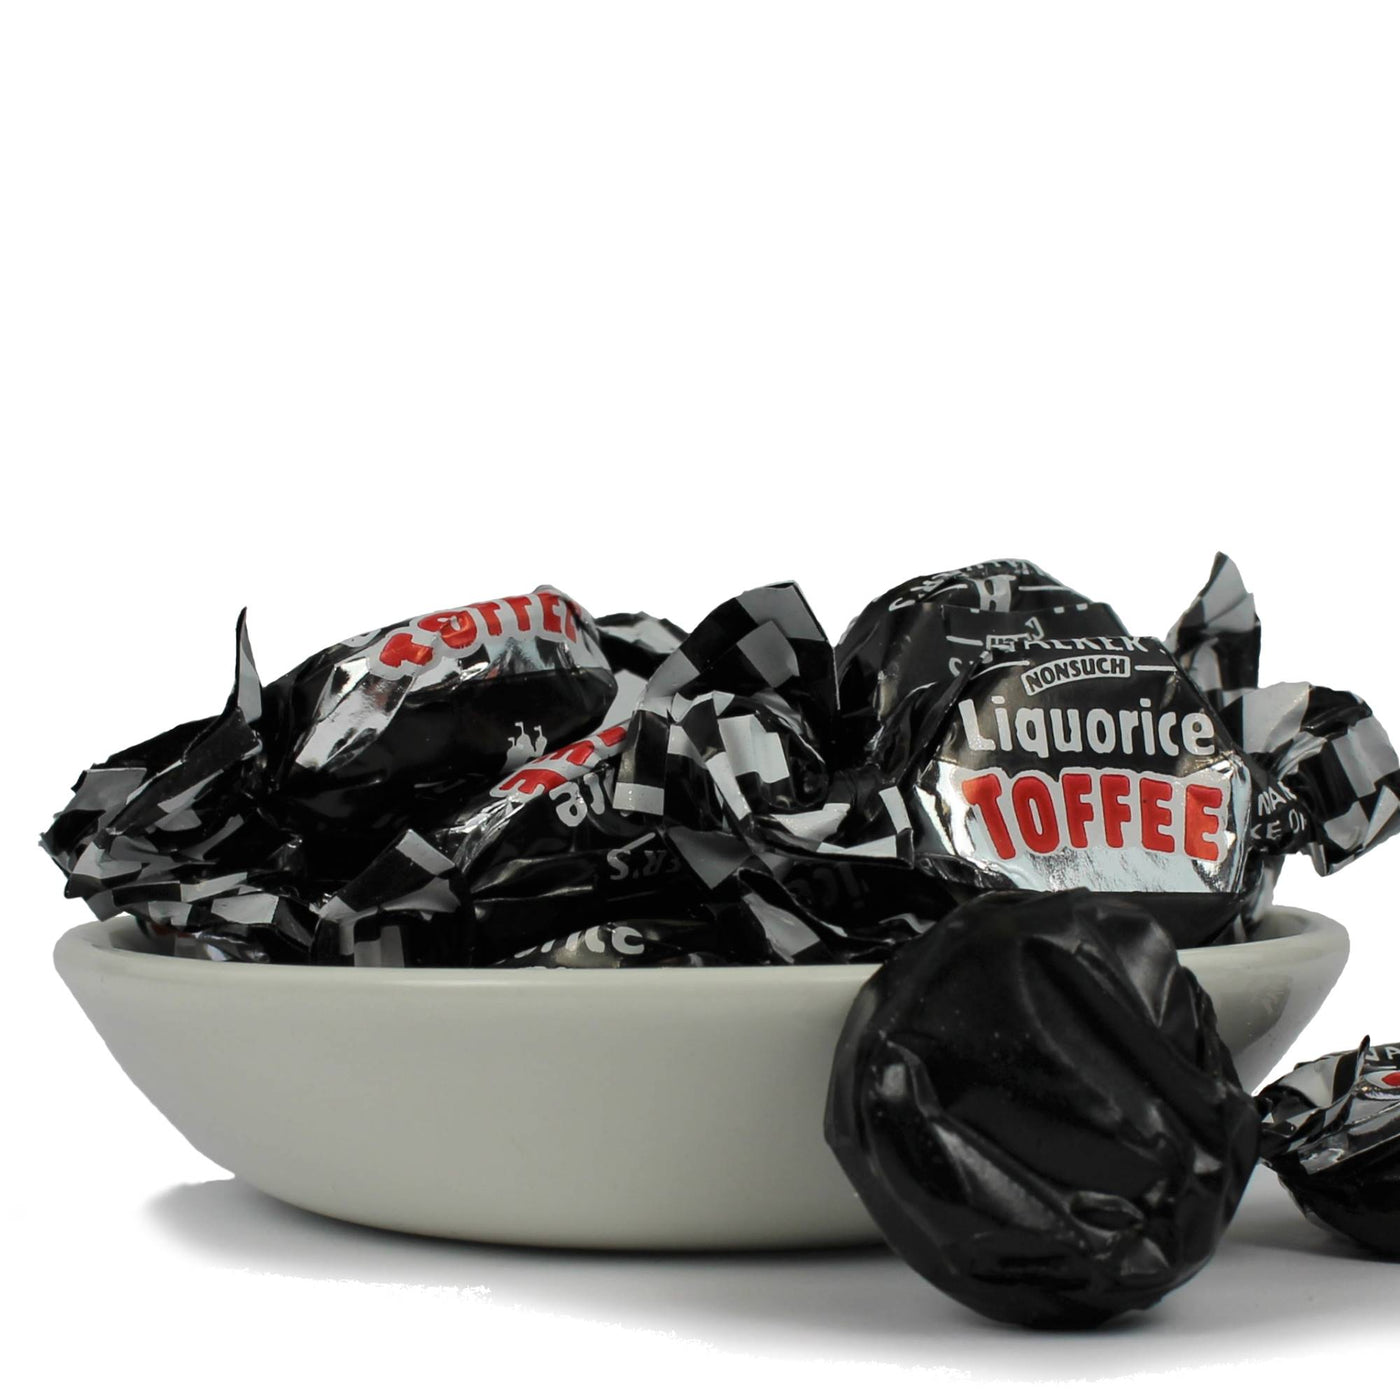 Walker’s Nonsuch Liquorice Toffees – Traditional English Liquorice Sweets